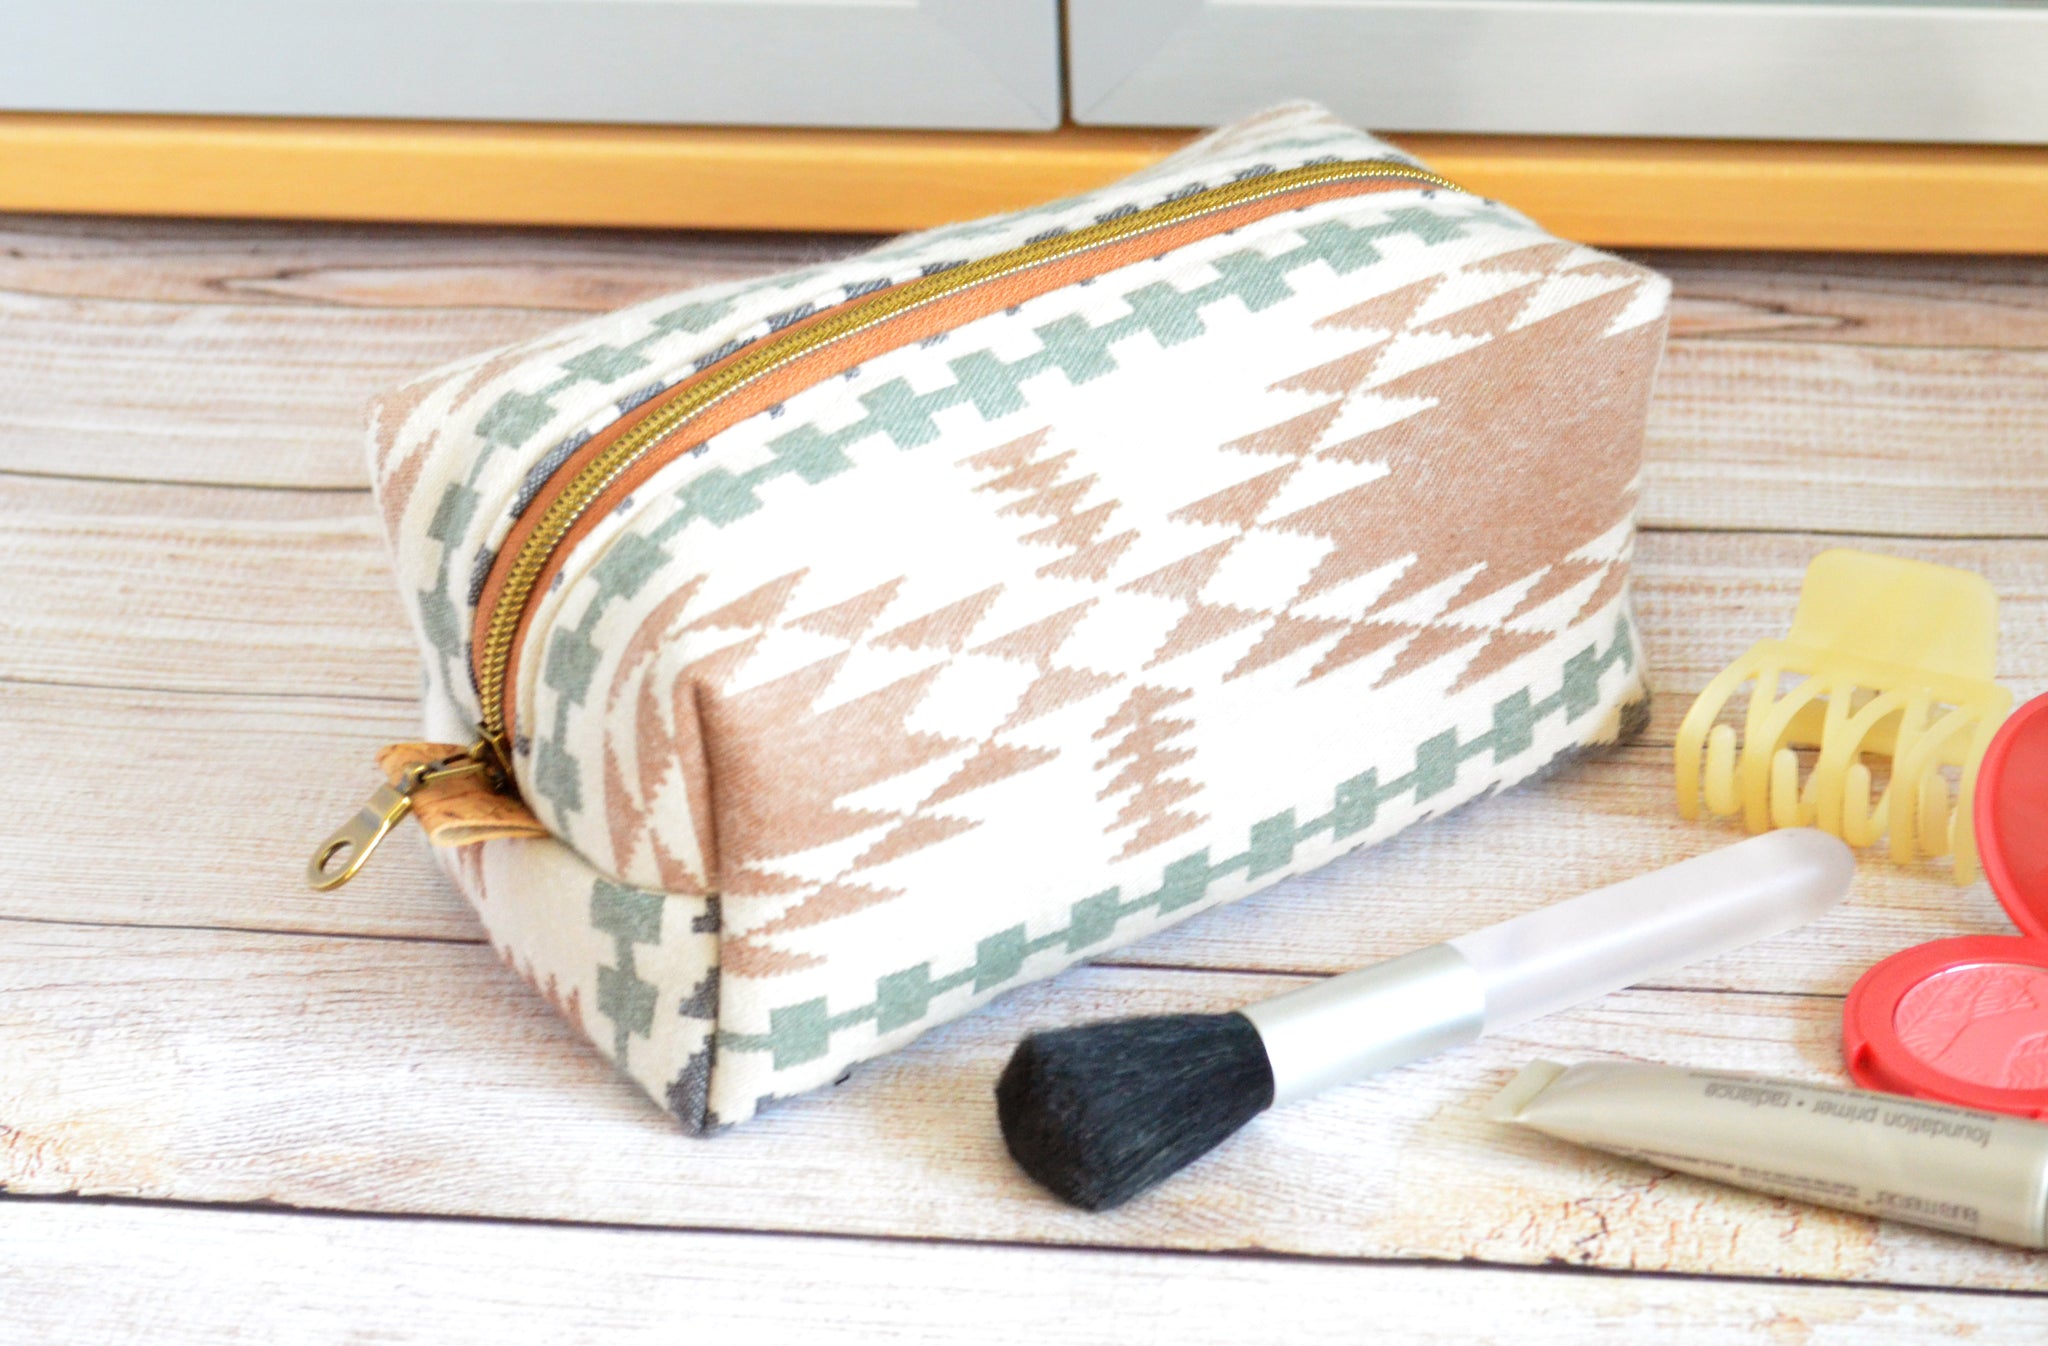 Light Brown Taos Flannel Boxy Toiletry Bag